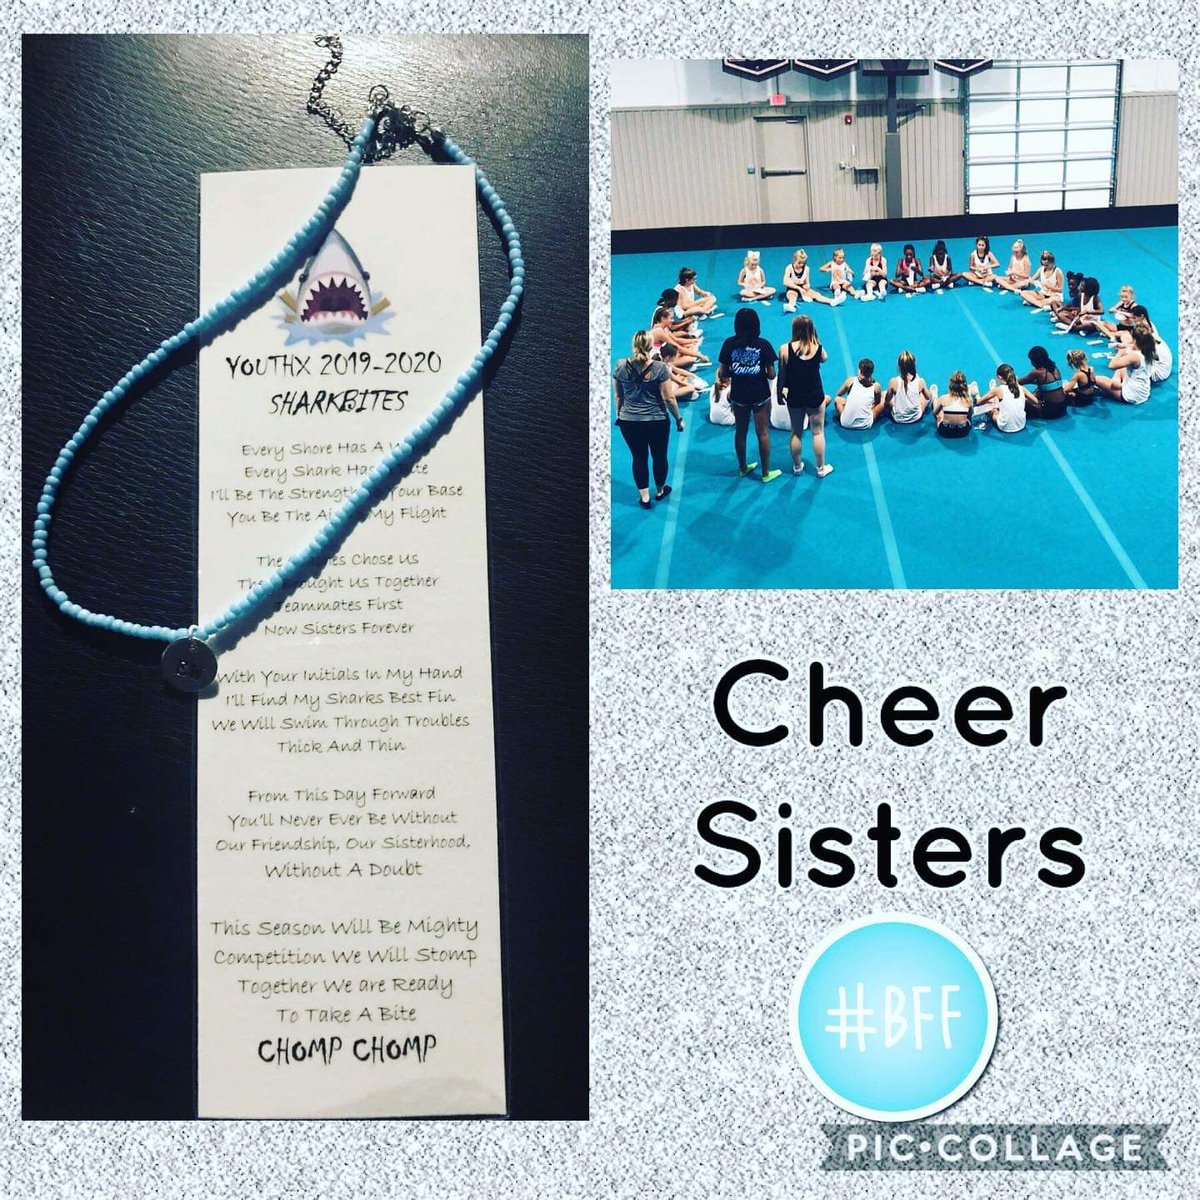 We had a blast getting our cheer sisters tonight!  #traditions #cheerextreme #cearaleigh #sharkbites